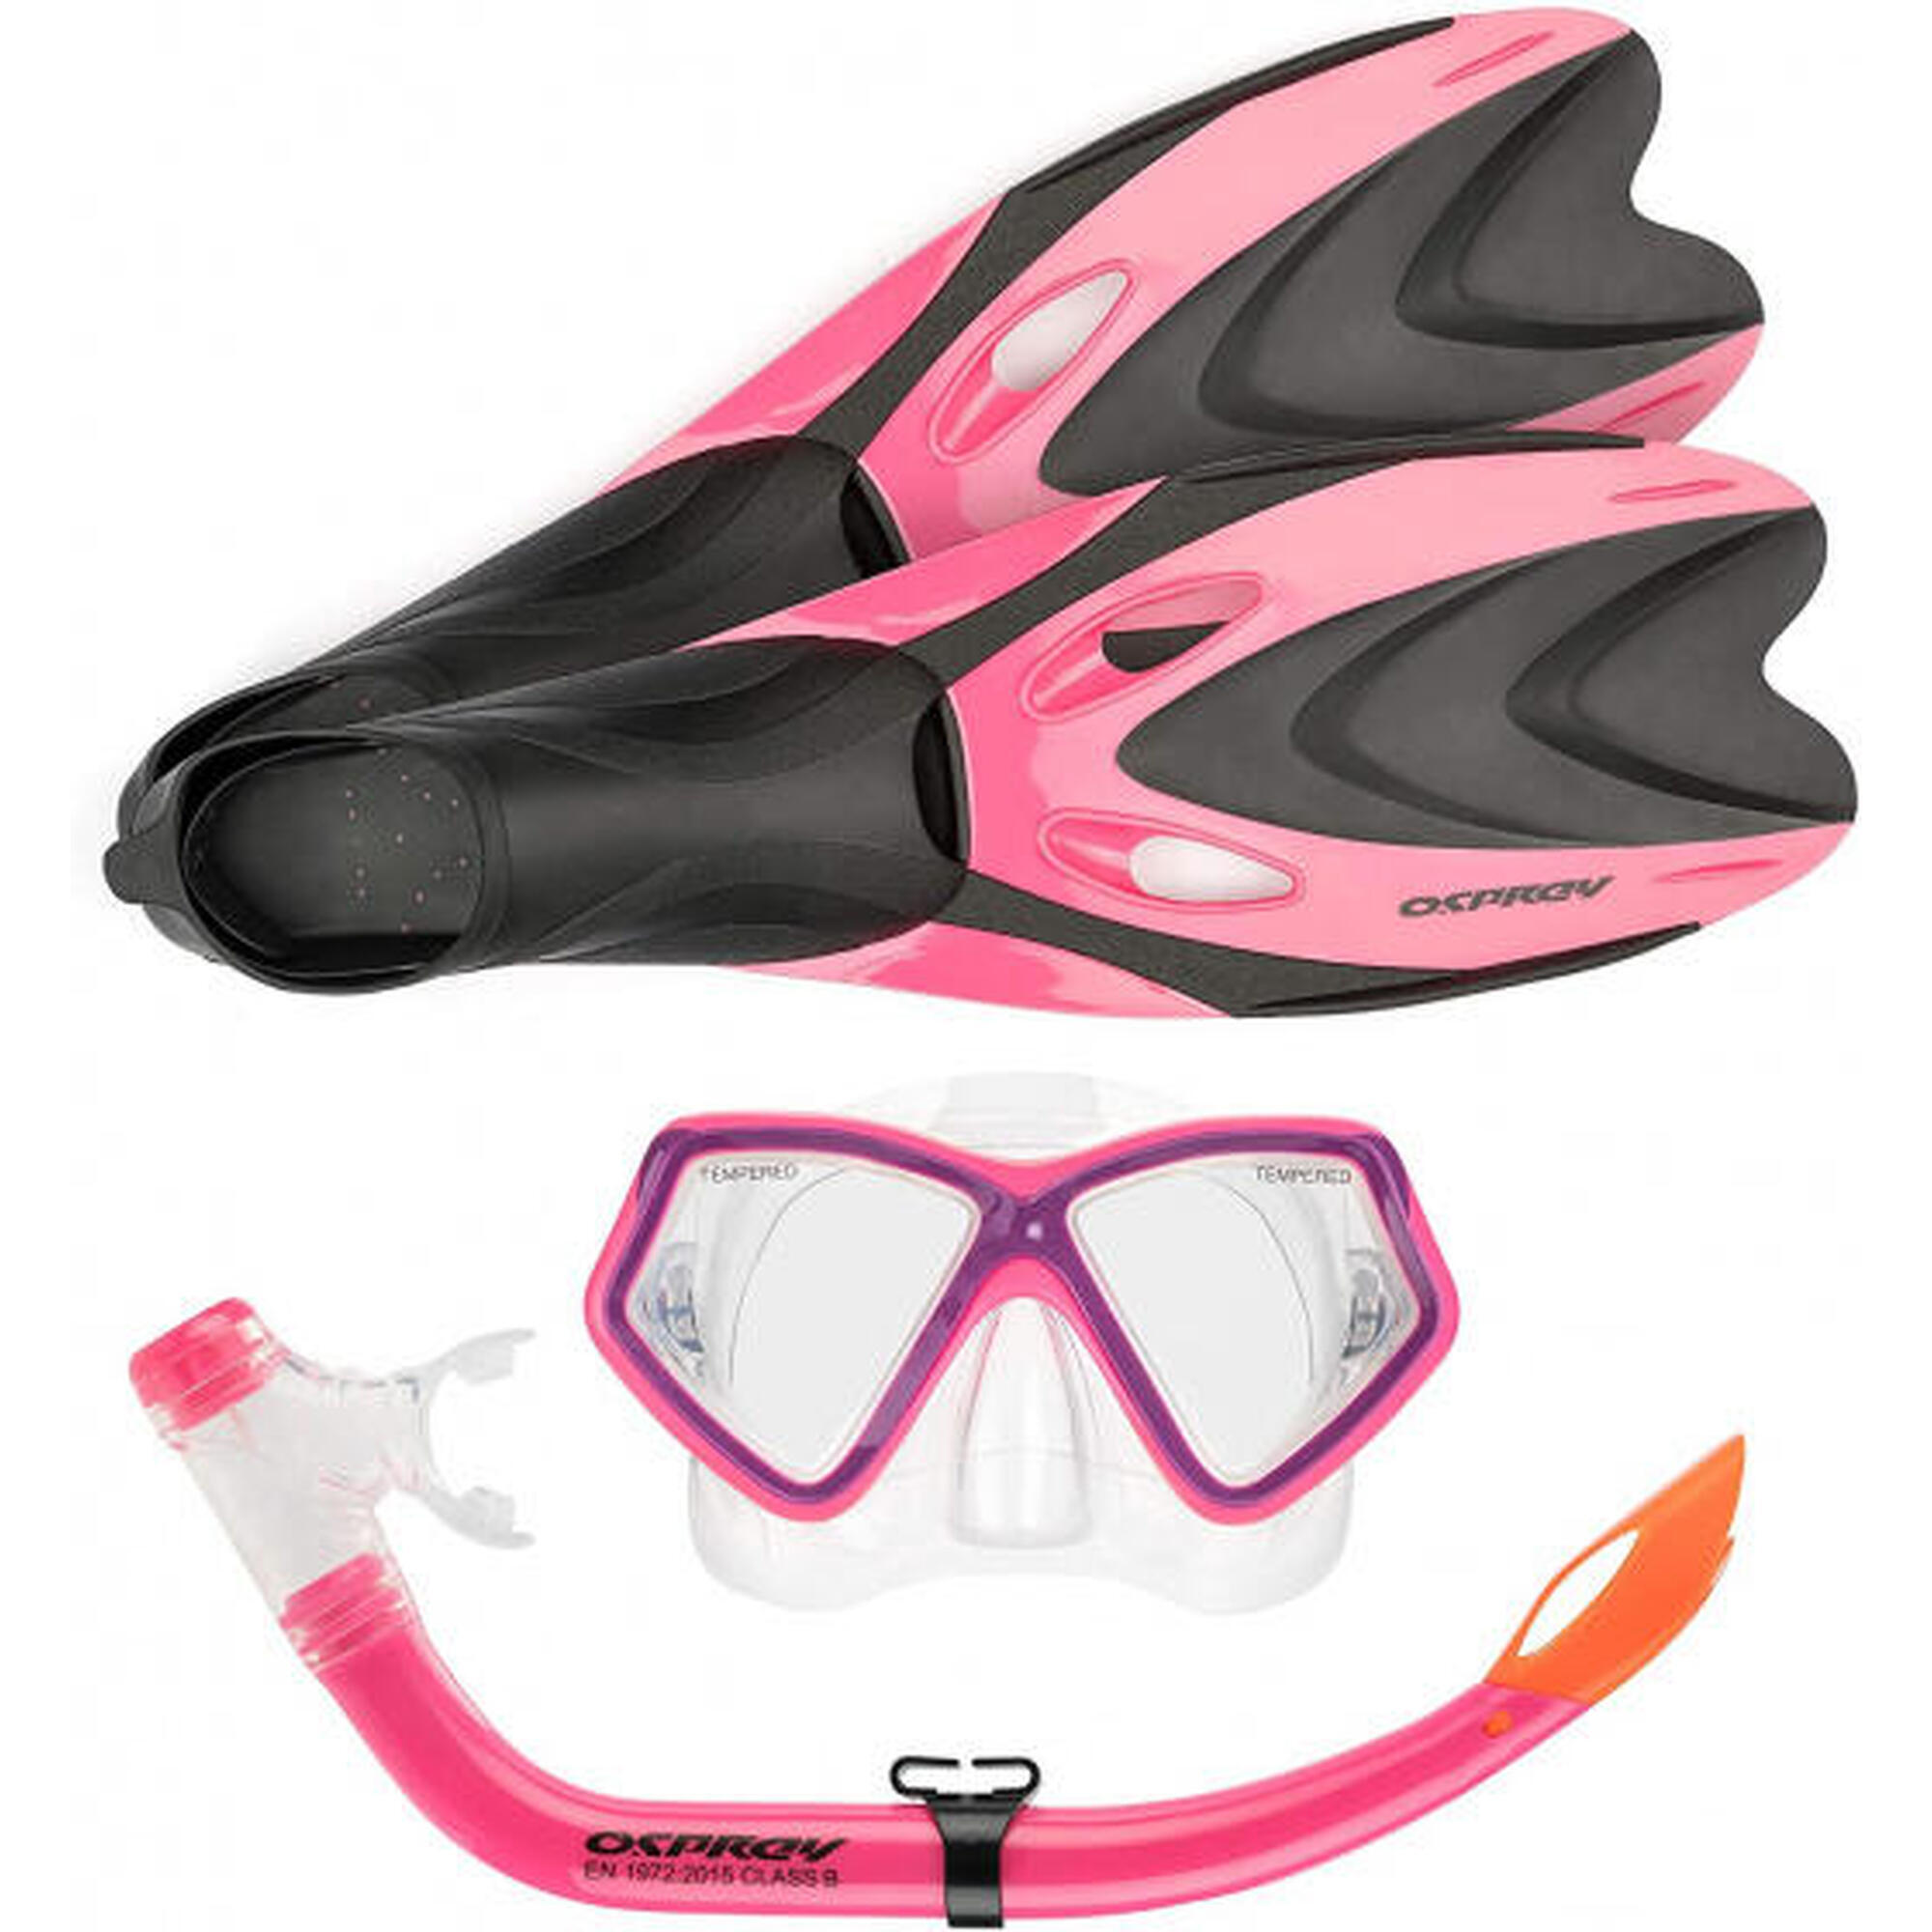 OSPREY ACTION SPORTS Osprey Junior Snorkel Set with Flippers and Fins, Pink